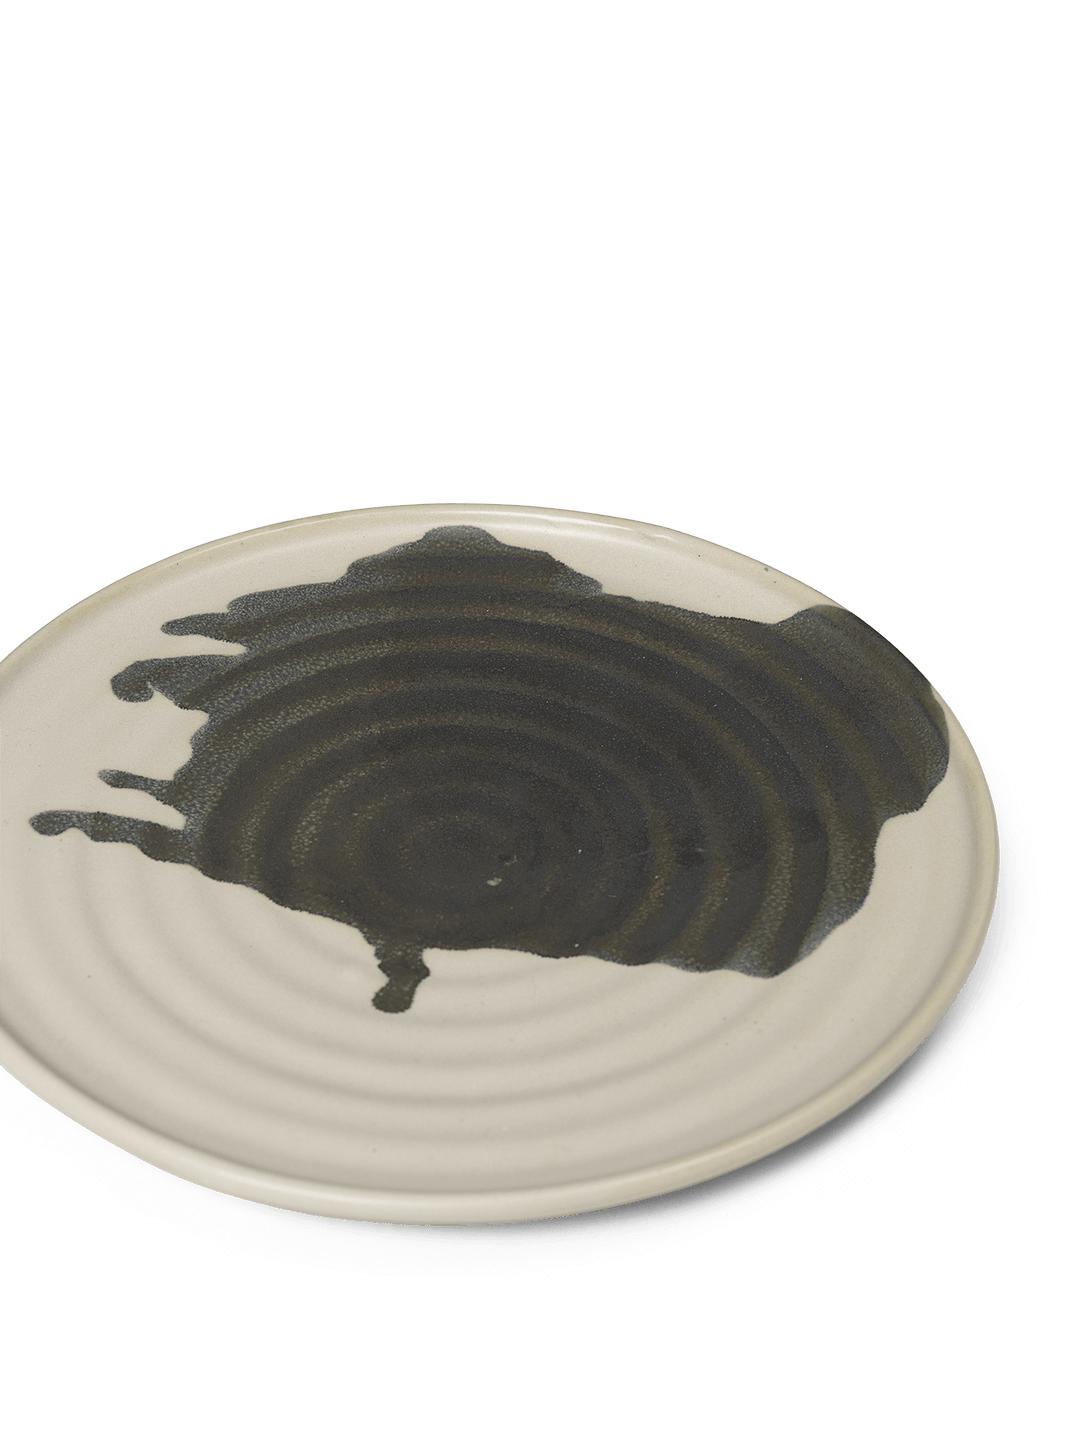 Ferm Living Omhu Plate Small, Off White/Charcoal